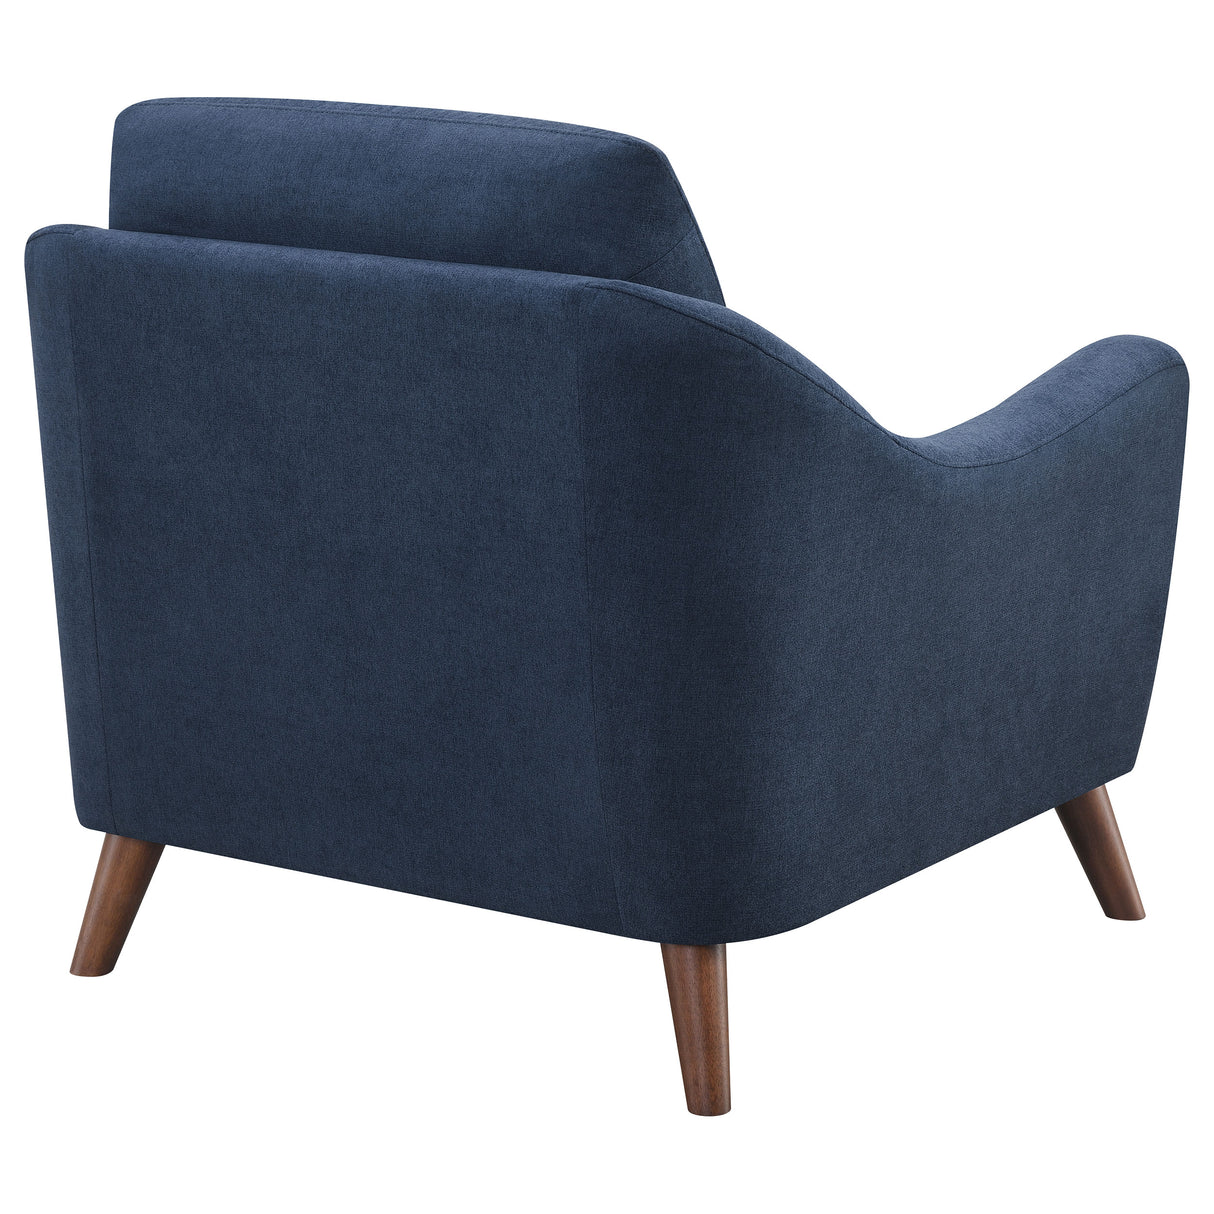 Chair - Gano Sloped Arm Upholstered Chair Navy Blue